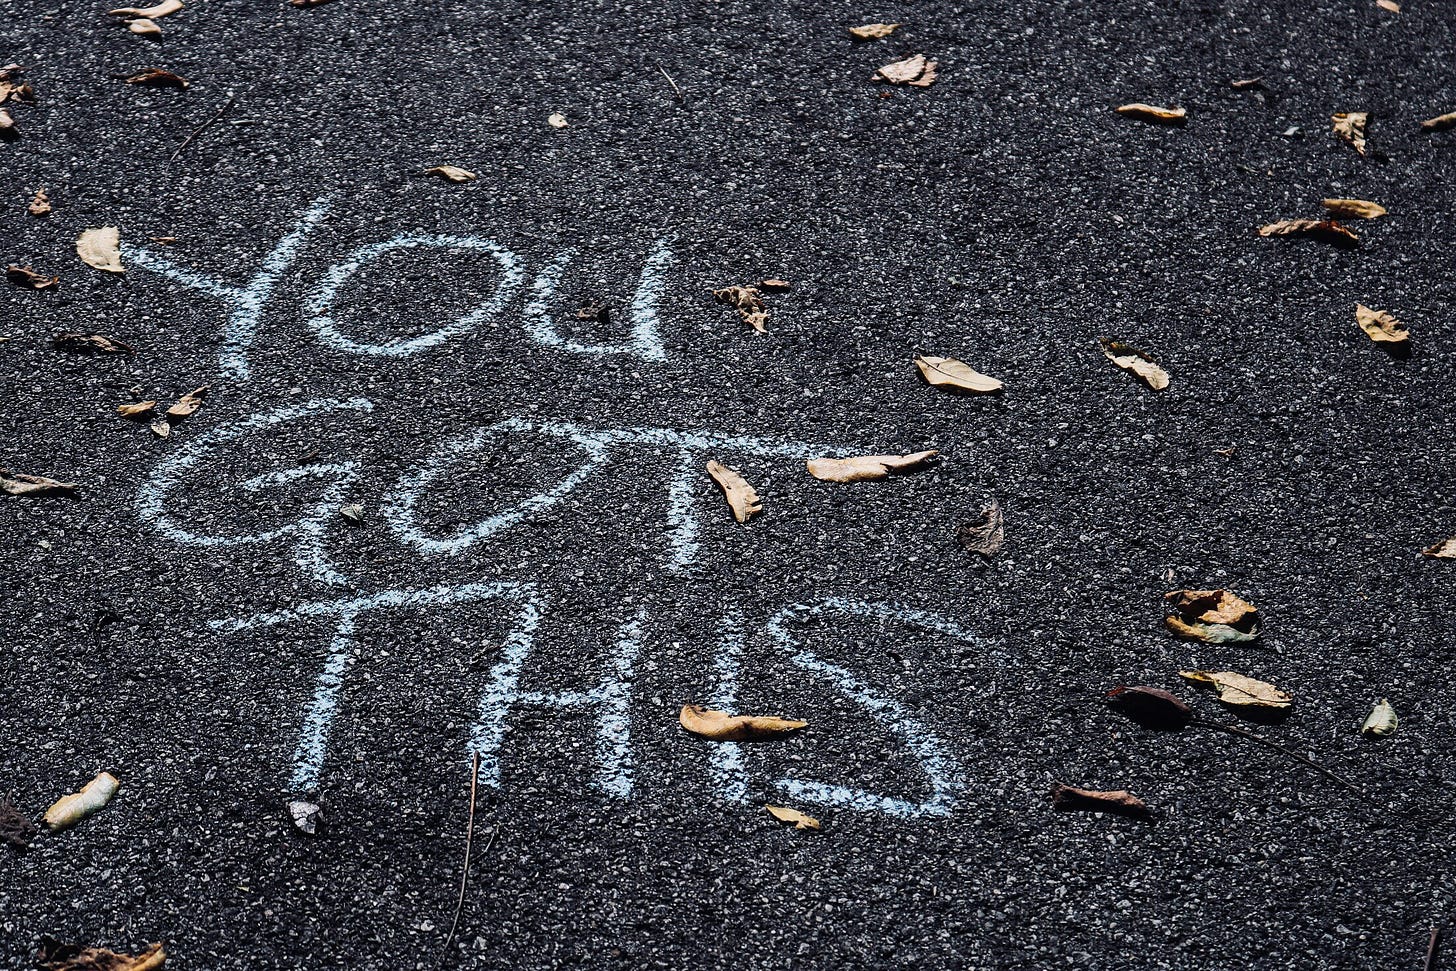 You got this chalked onto the street.